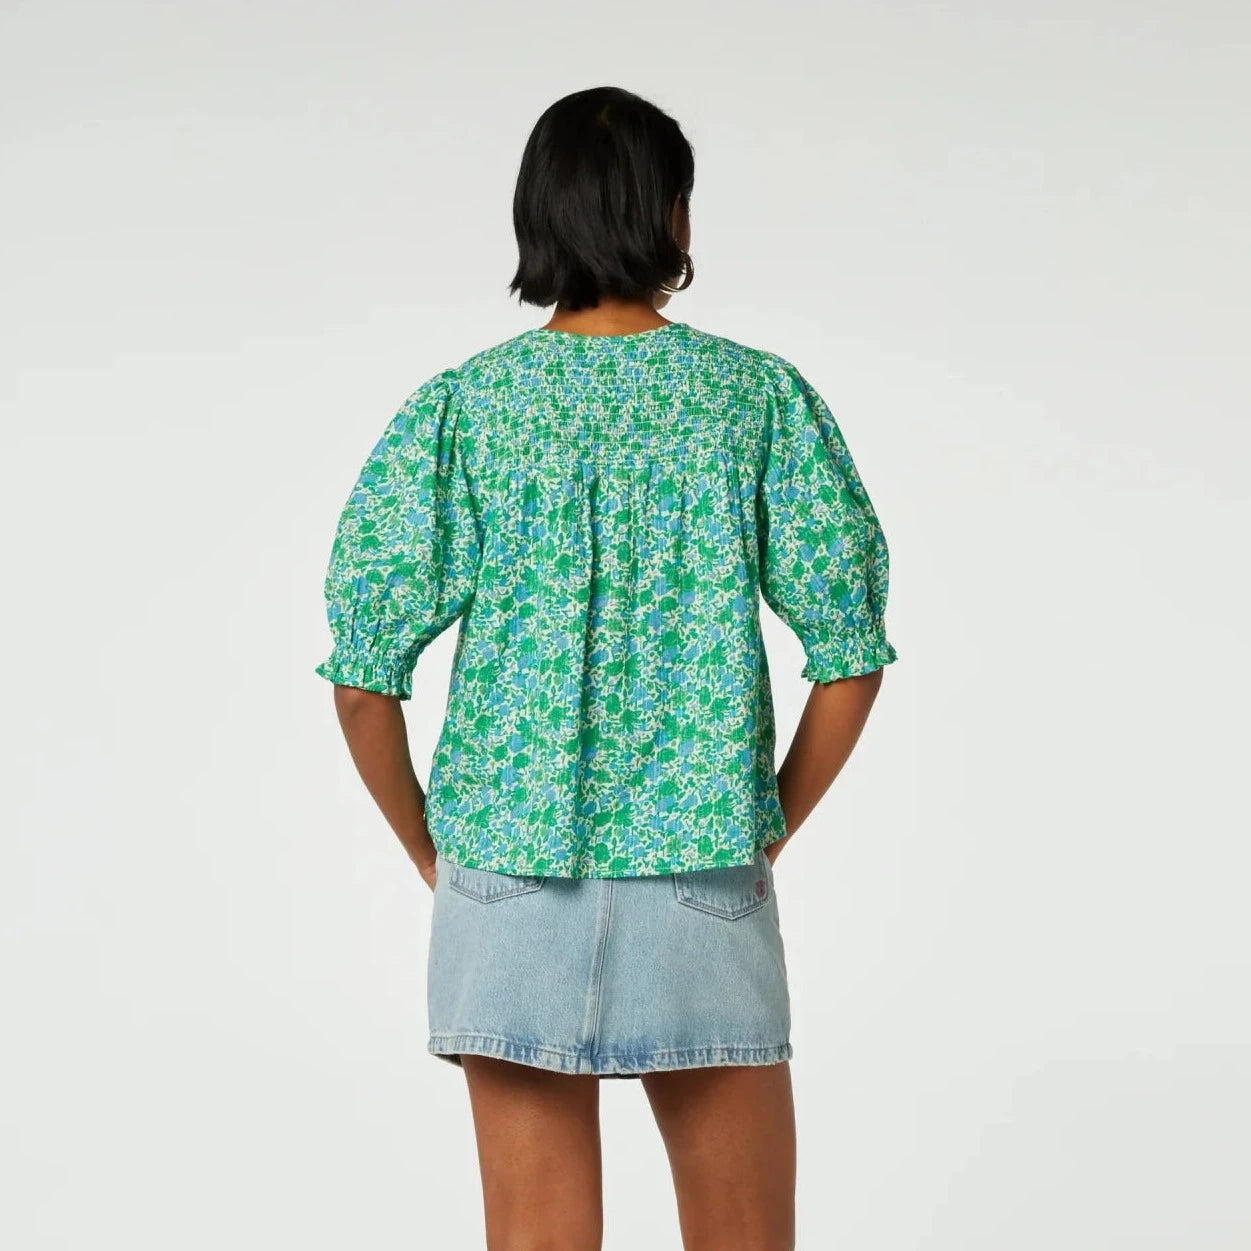 A woman stands facing away from the camera, wearing a June Short Sleeve Organic Top in Green Clueless by Fabienne Chapot and denim shorts against a white background.